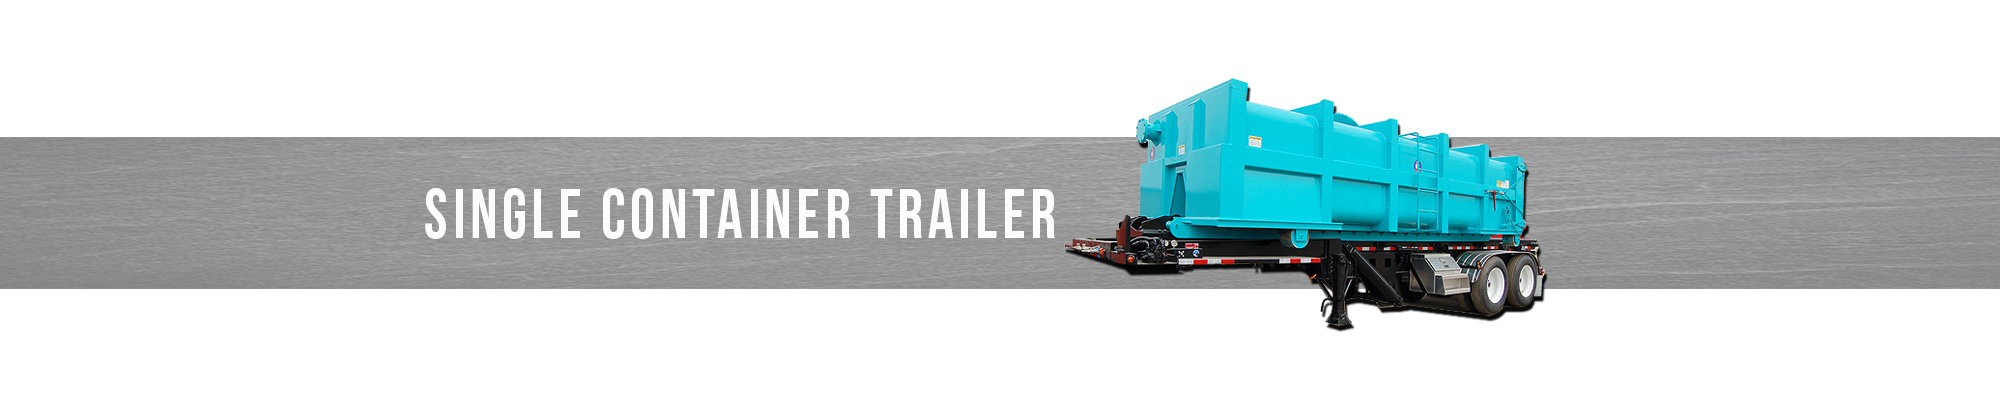 SINGLE CONTAINER TRAILER